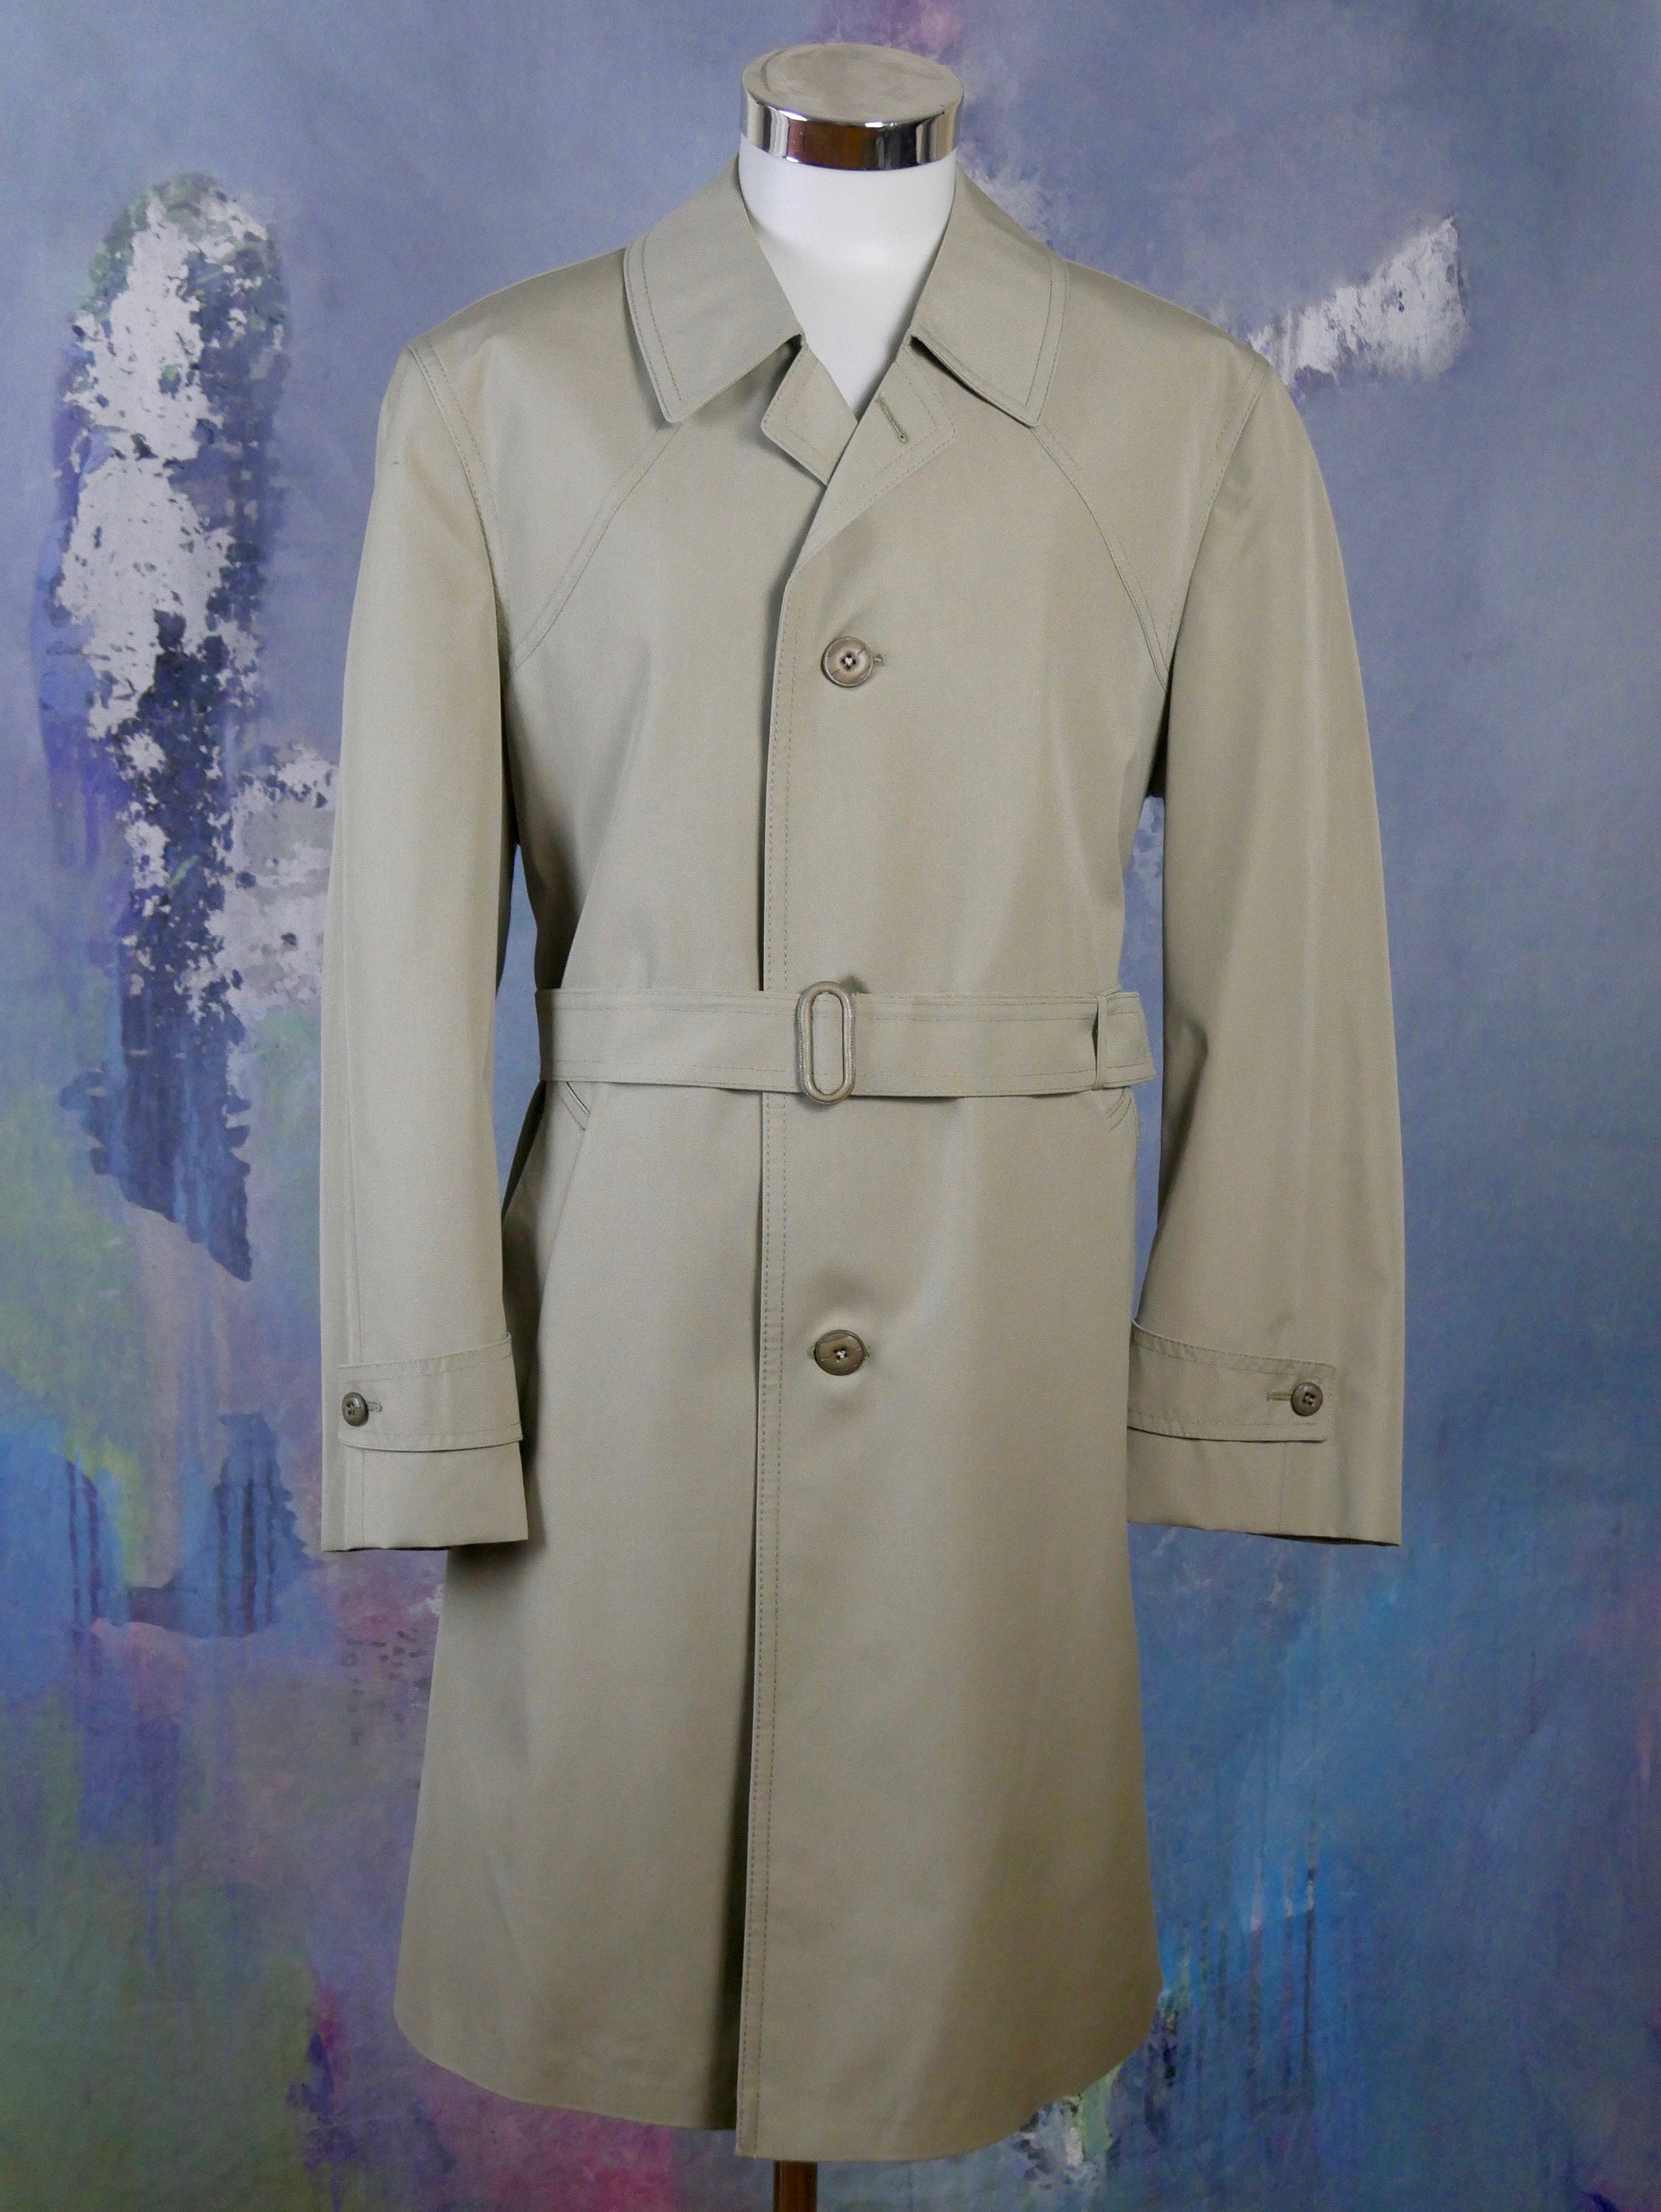 Vintage Trench Coat German Single-breasted Dusty Pale Green | Etsy